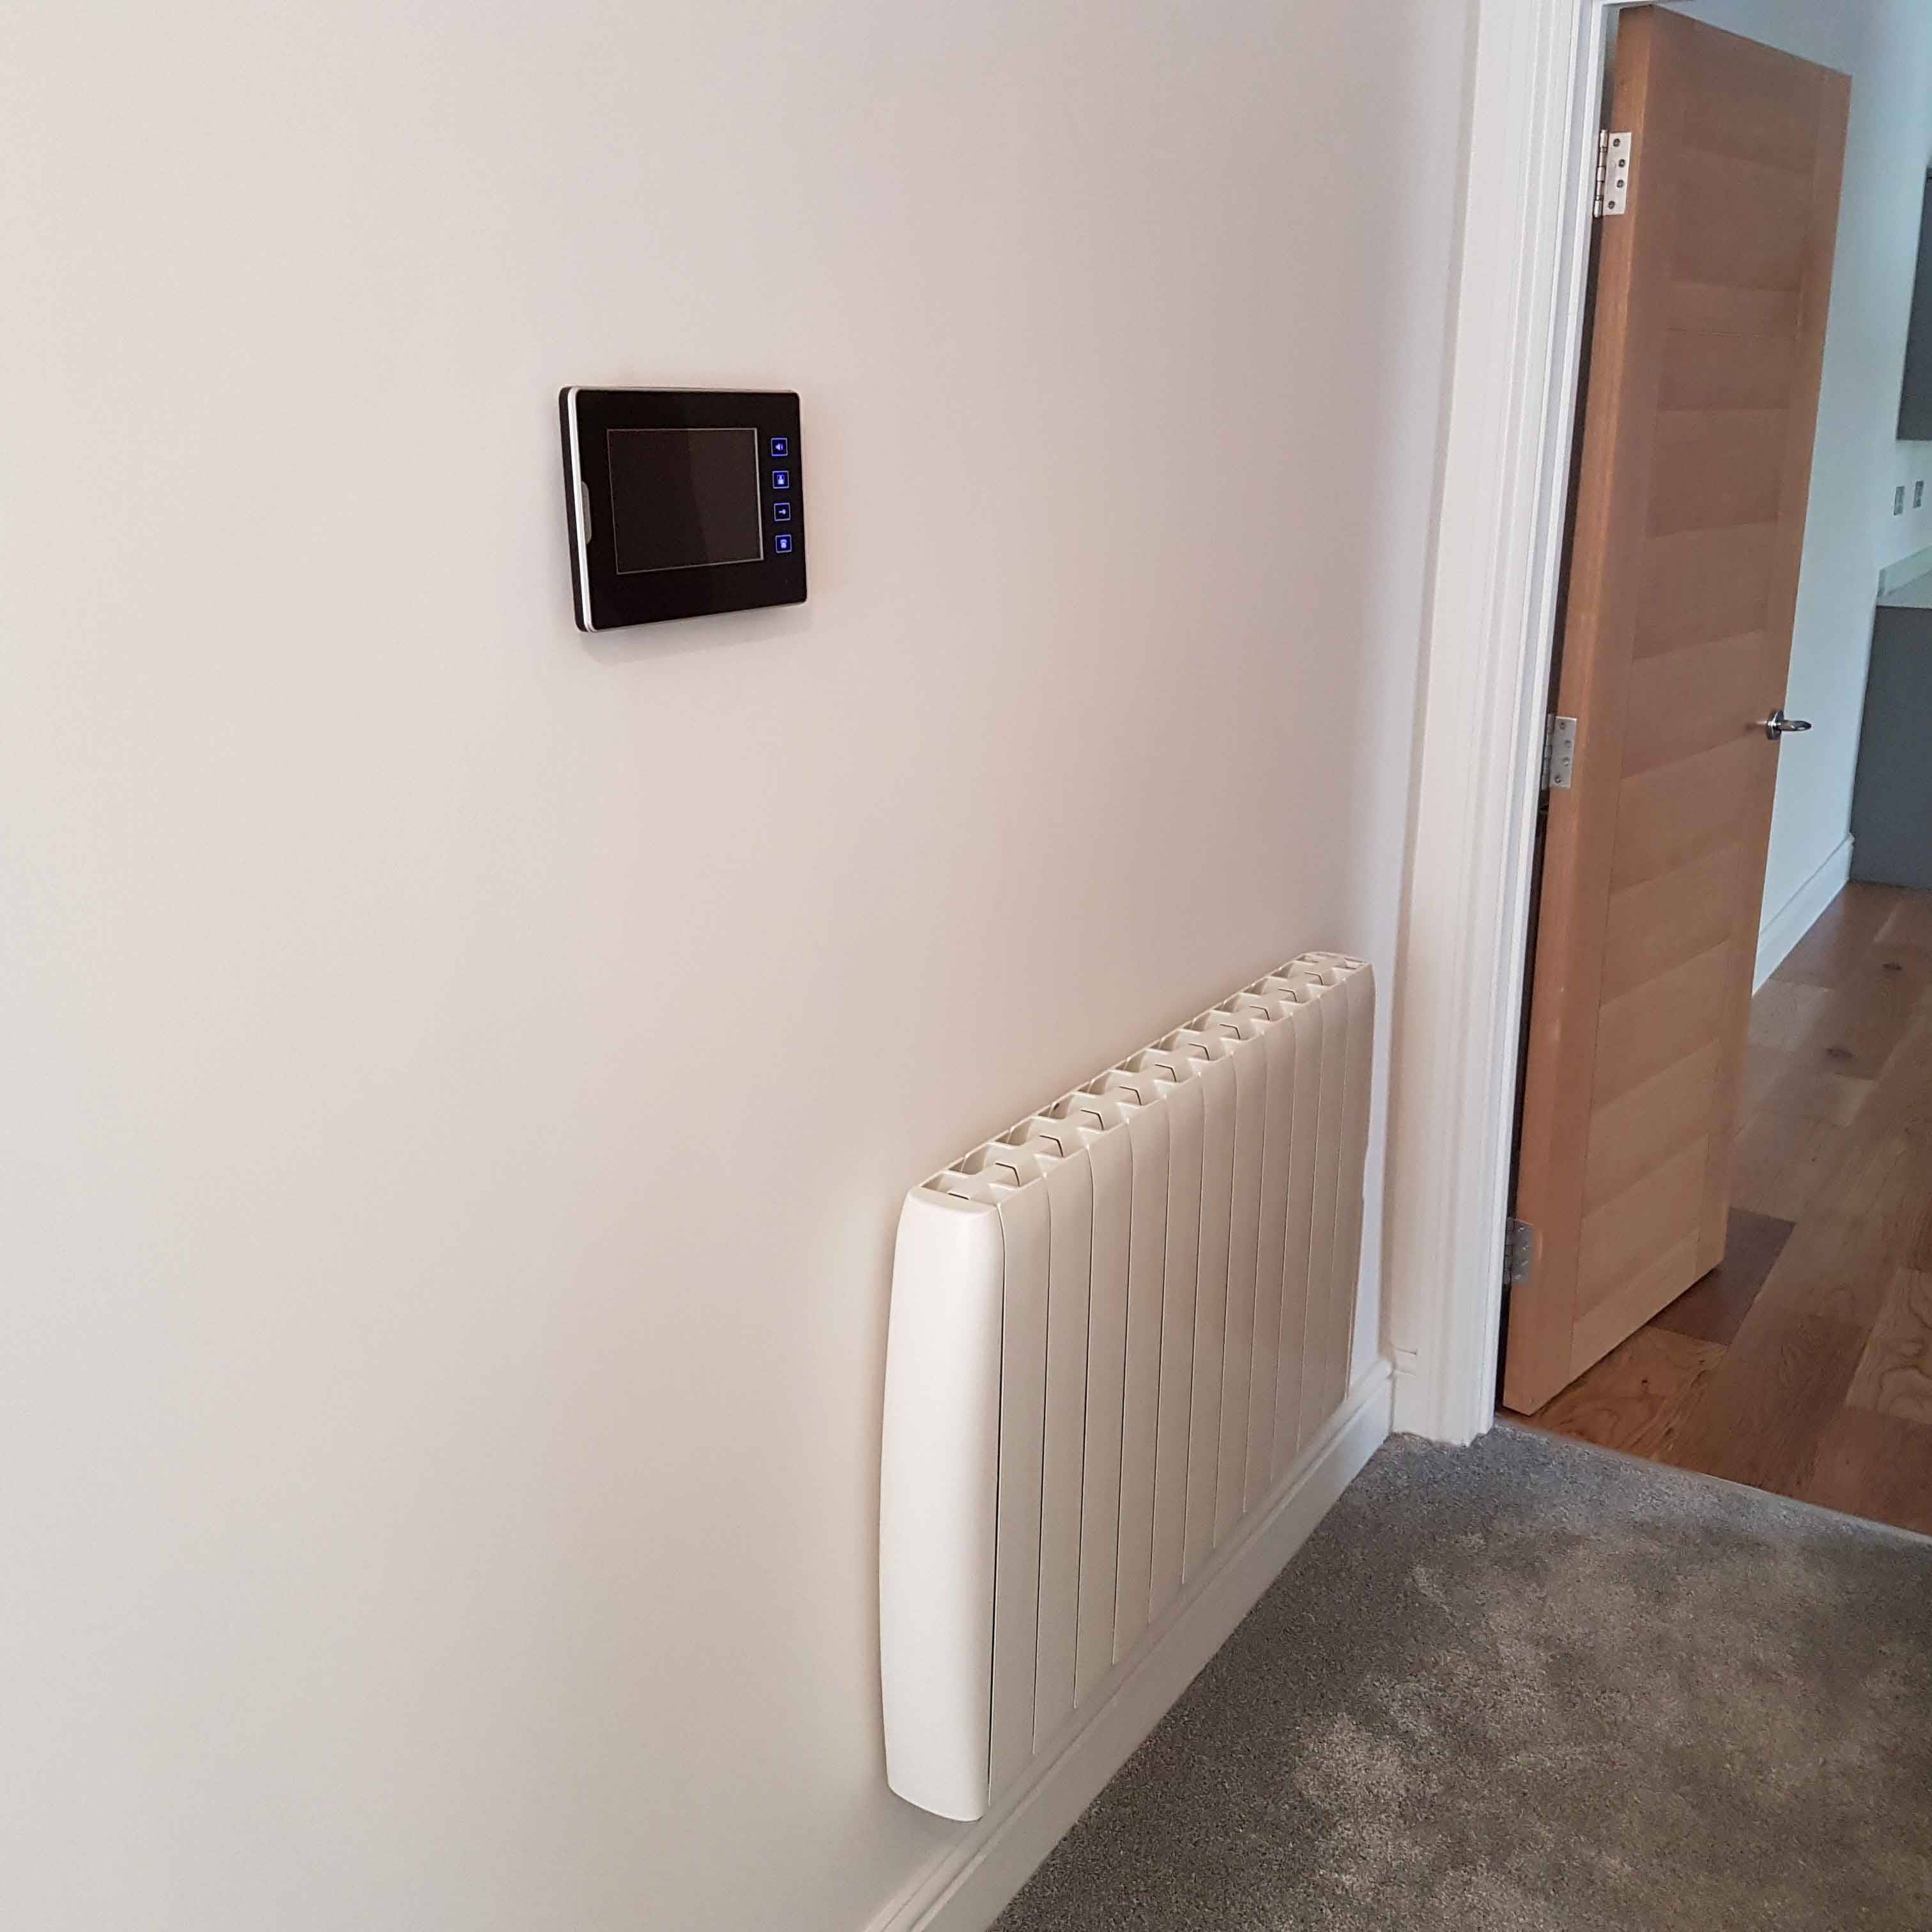 Cleverspark Electrical Installers and Electrians based in Bristol, Bath and the South West of England - An example of interior video and electric heating installation